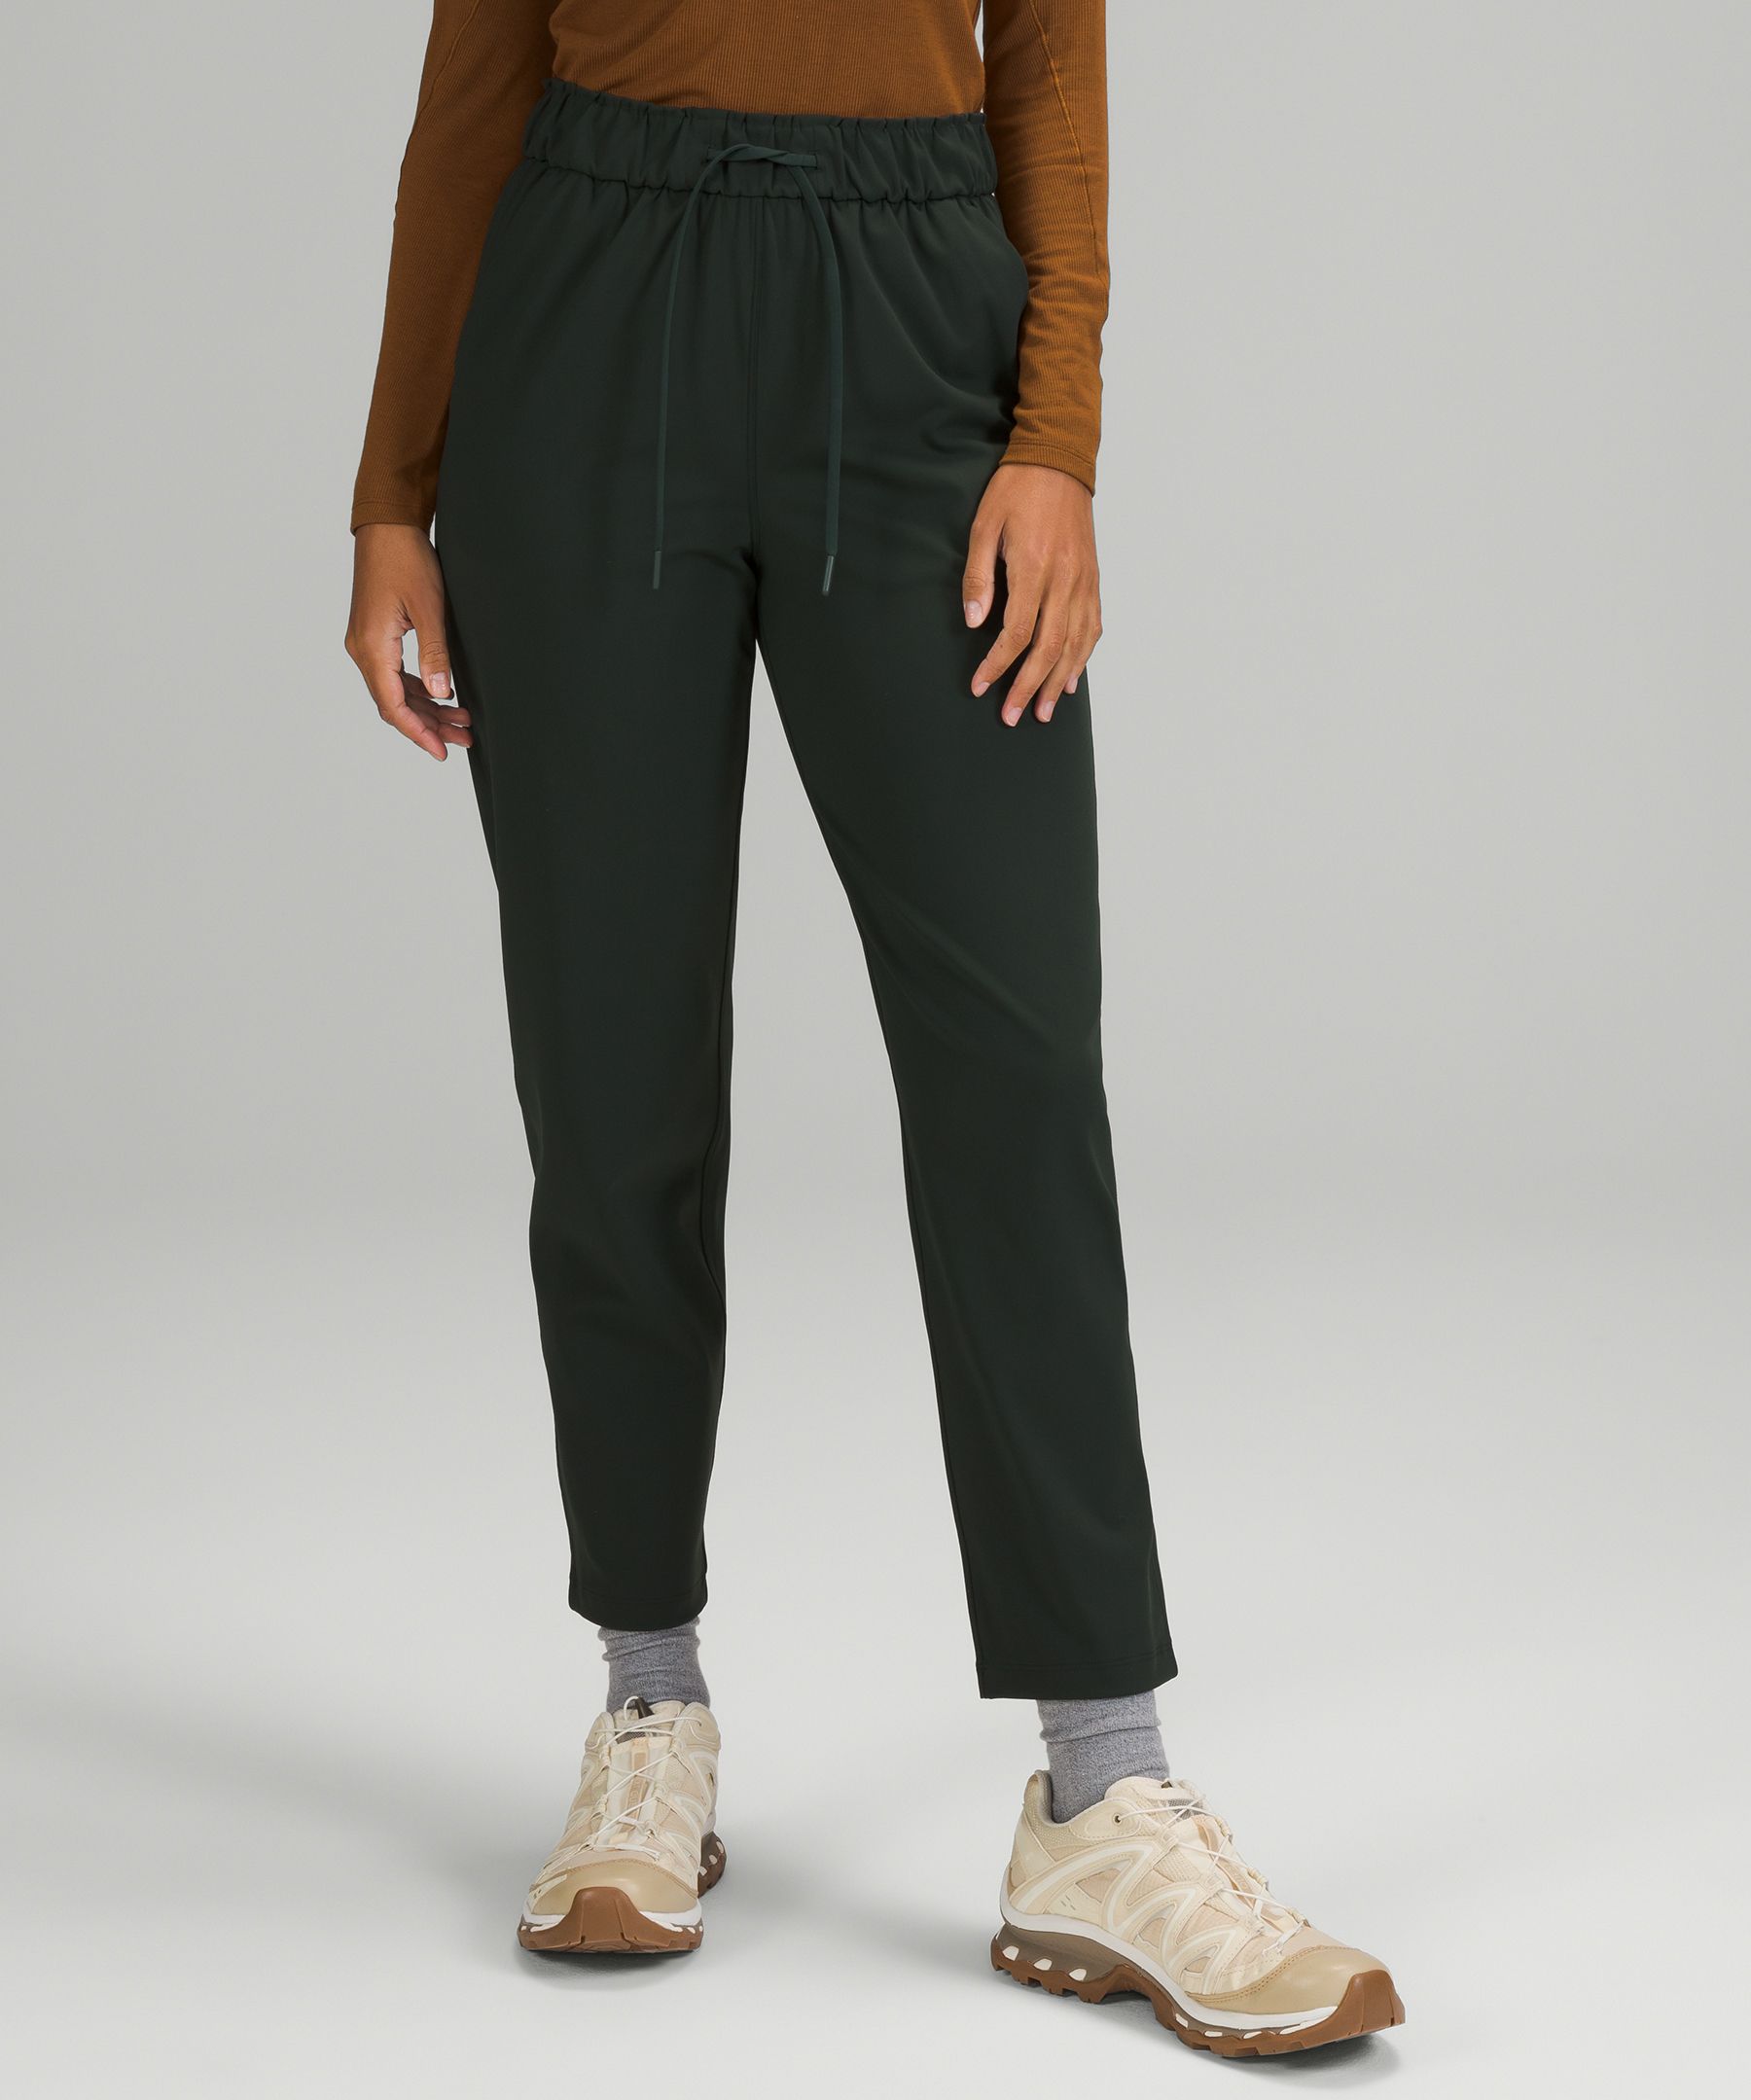 Looking for office outfit ideas/inspiration for the Stretch high-rise pant  7/8 length : r/lululemon